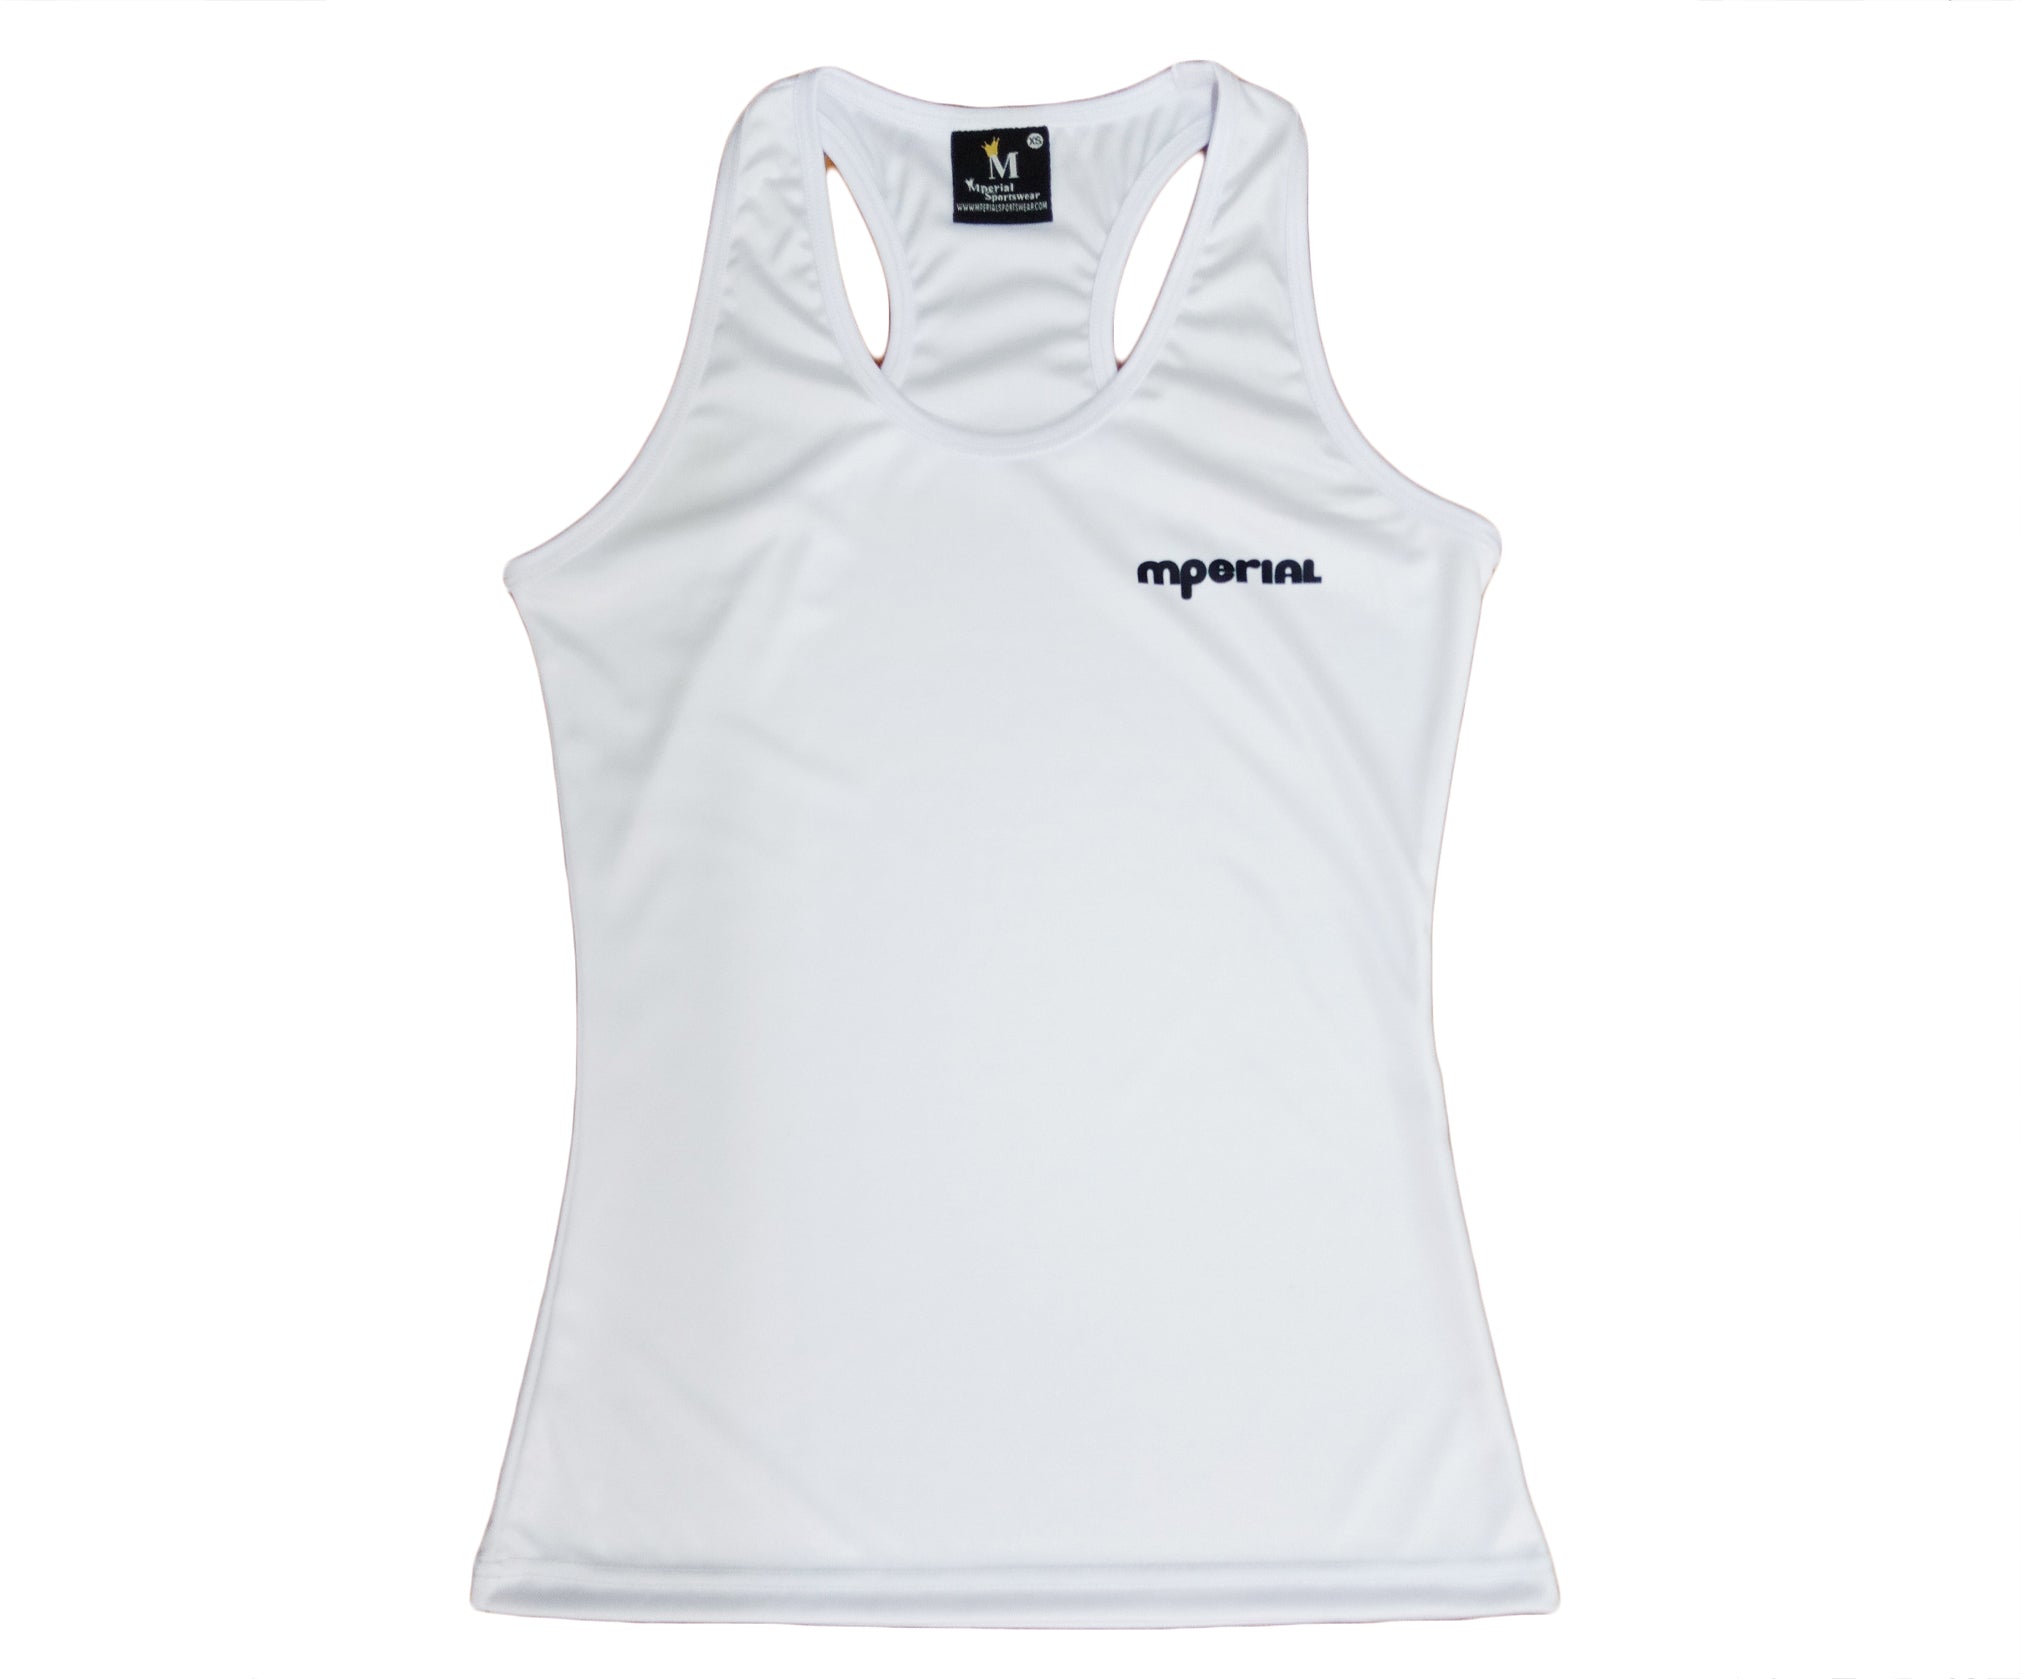 Women's Mperial Top (white)